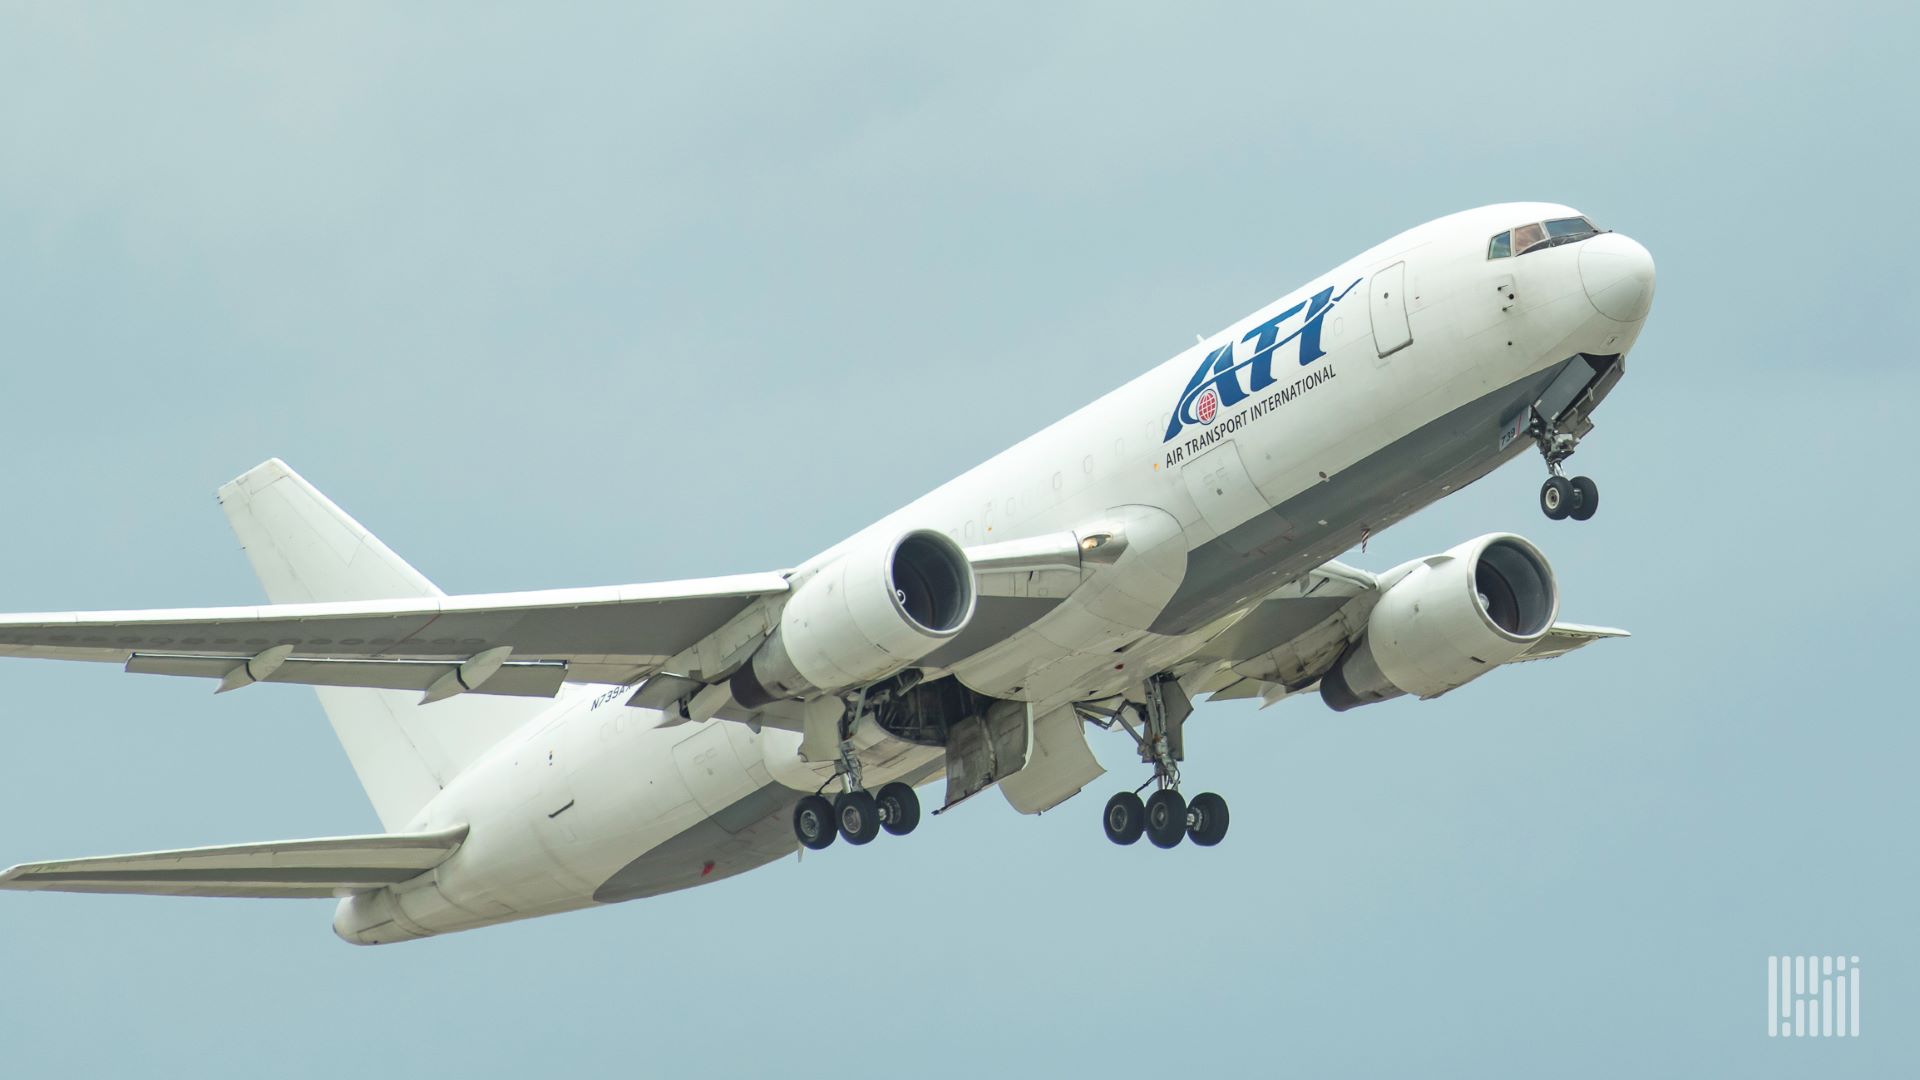 A white cargo jet with wheels down takes off against a gray sky.